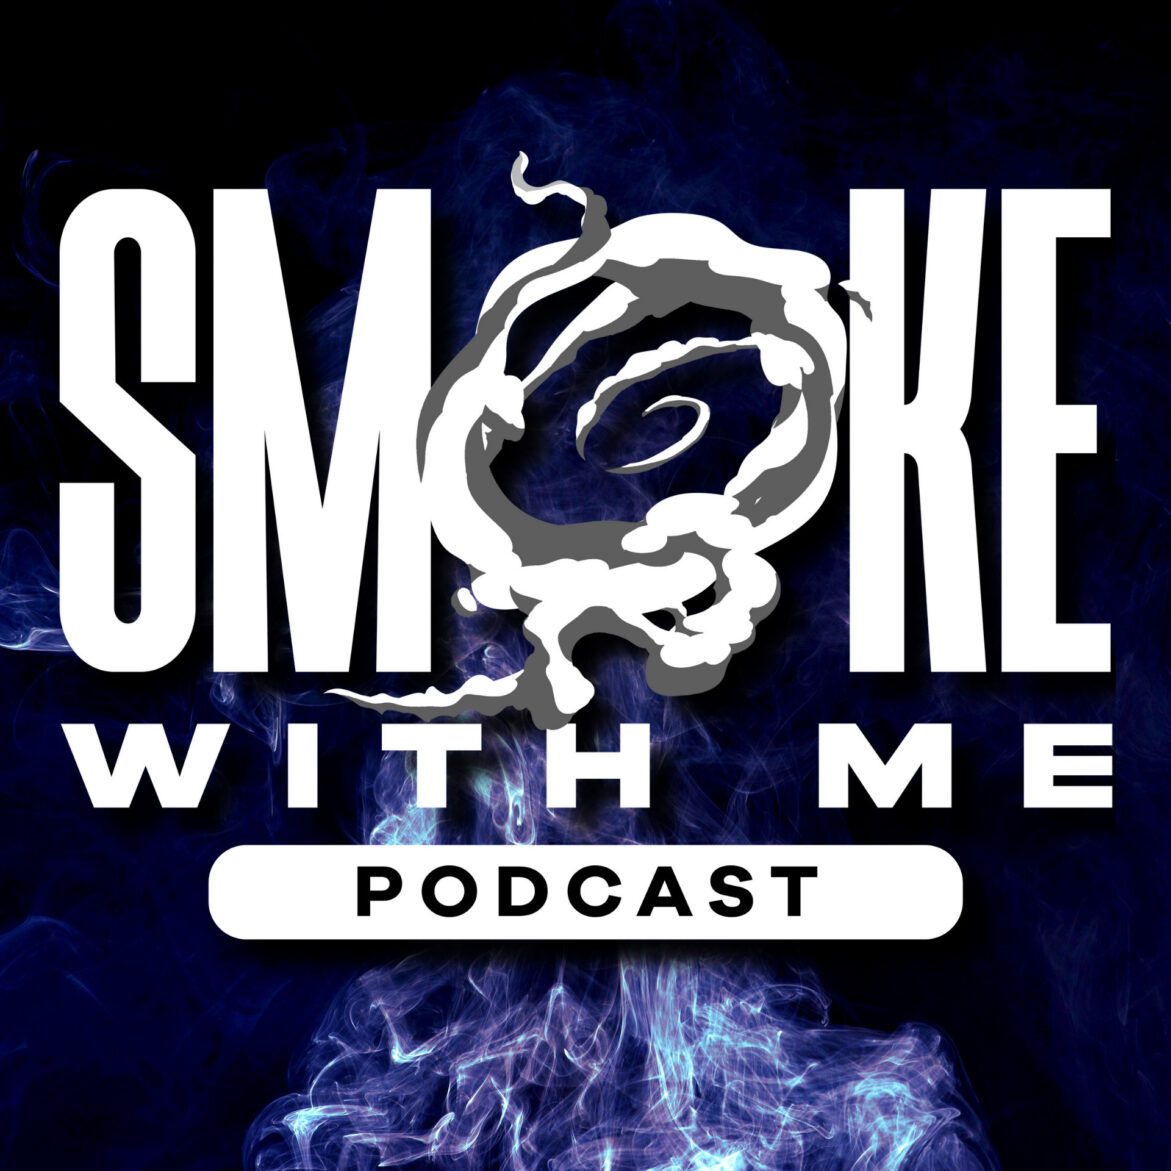 Black Podcasting - Guilty Until Proven Guilty feat. Donte West | Smoke With Me Pod (Episode 10)